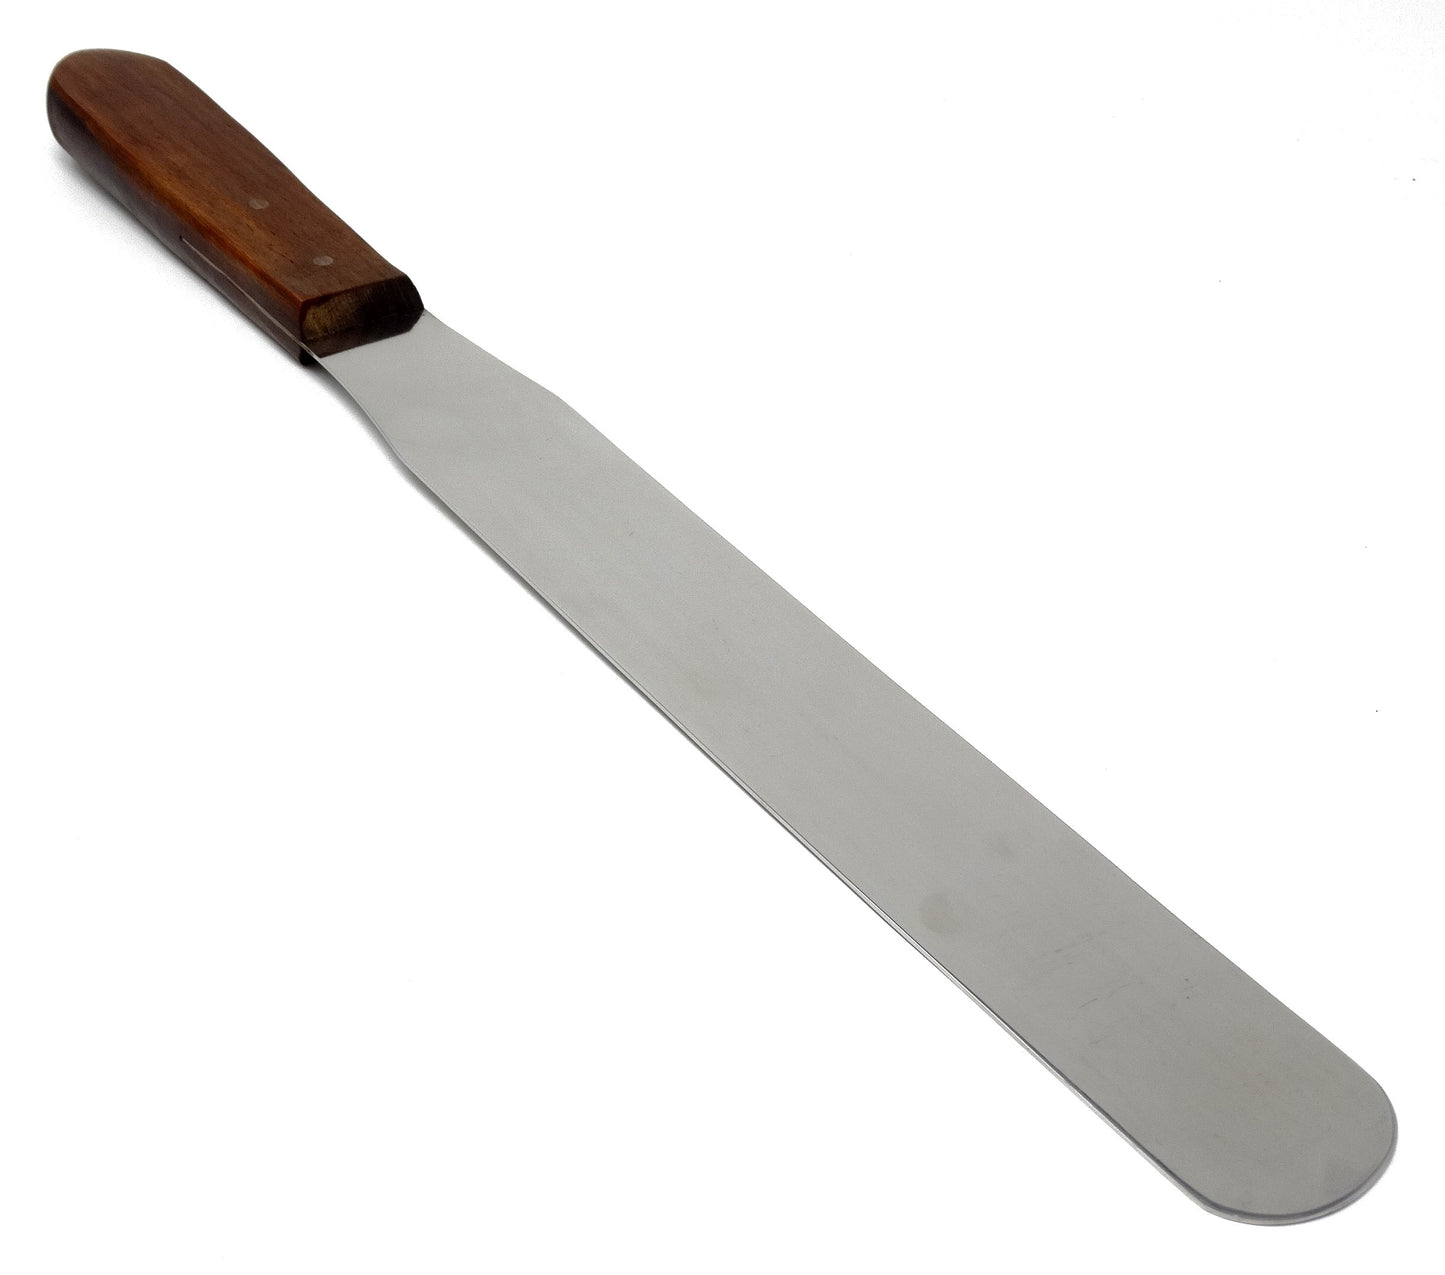 IMS-WHS12 Stainless Steel Lab Spatula with Wooden Handle, 12" Blade, 1.75" Blade Width, 17.25" Total Length